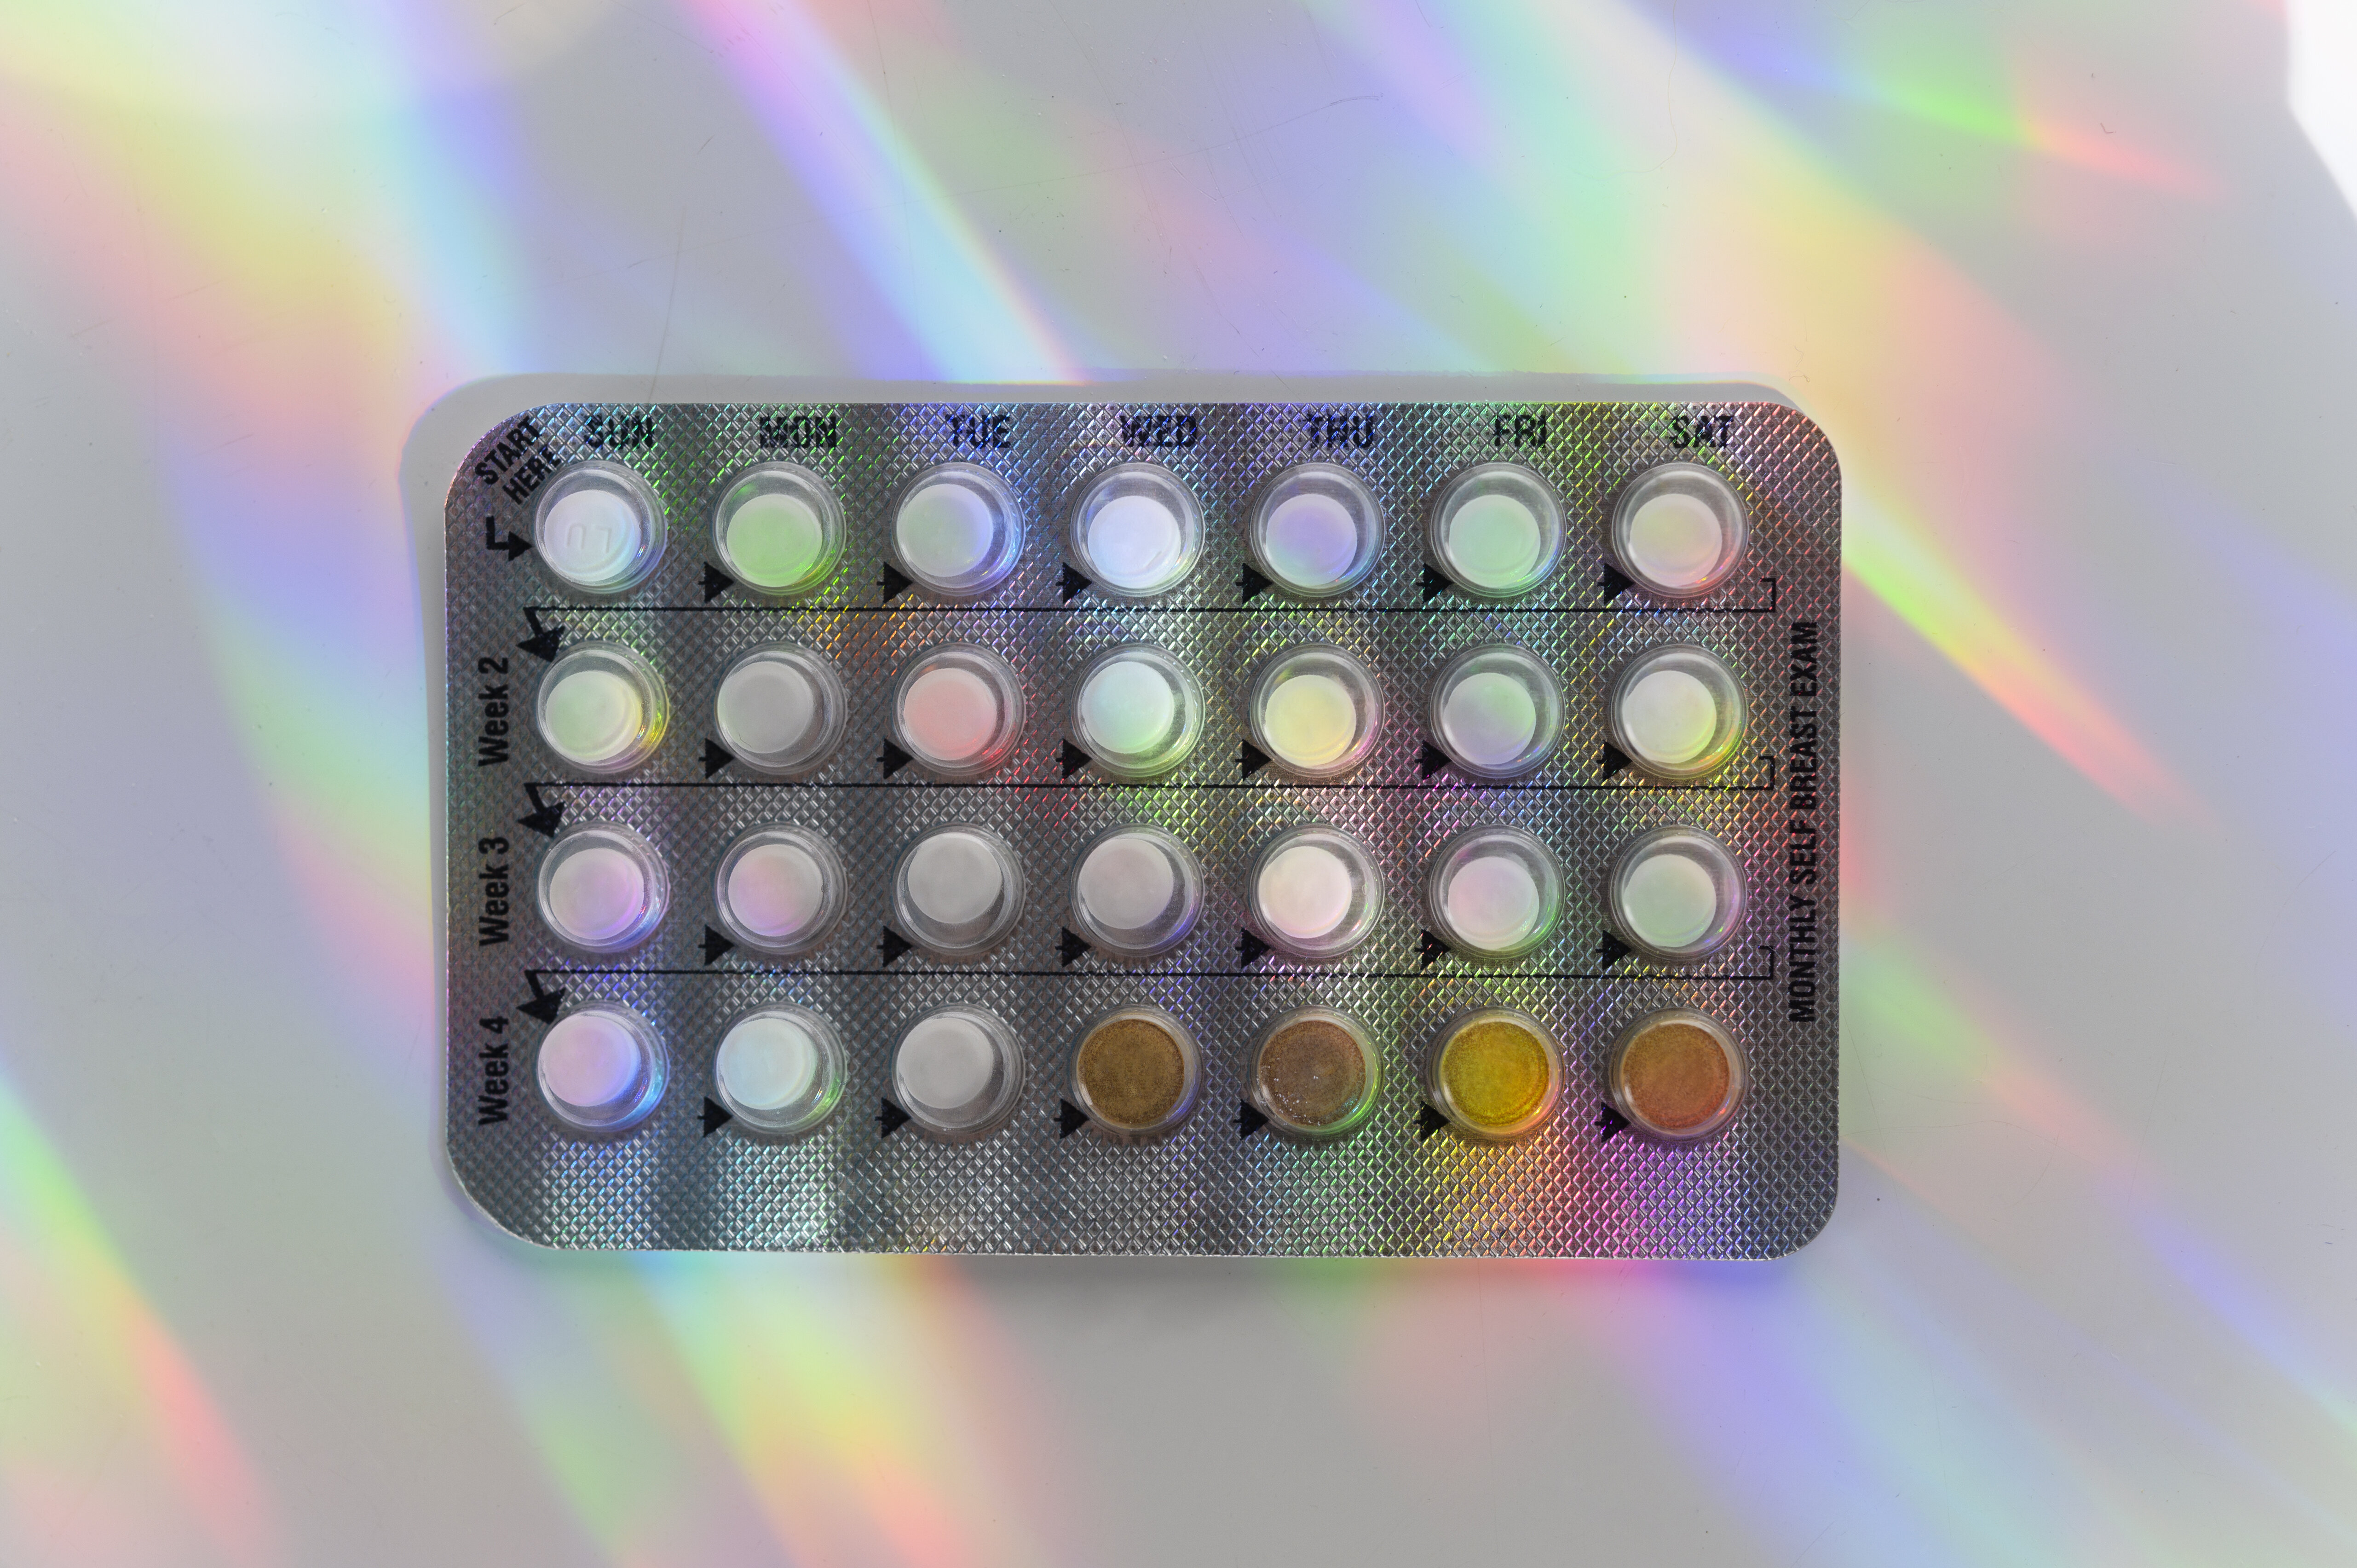 Blister pack of pills with some missing, against a backdrop with light reflections